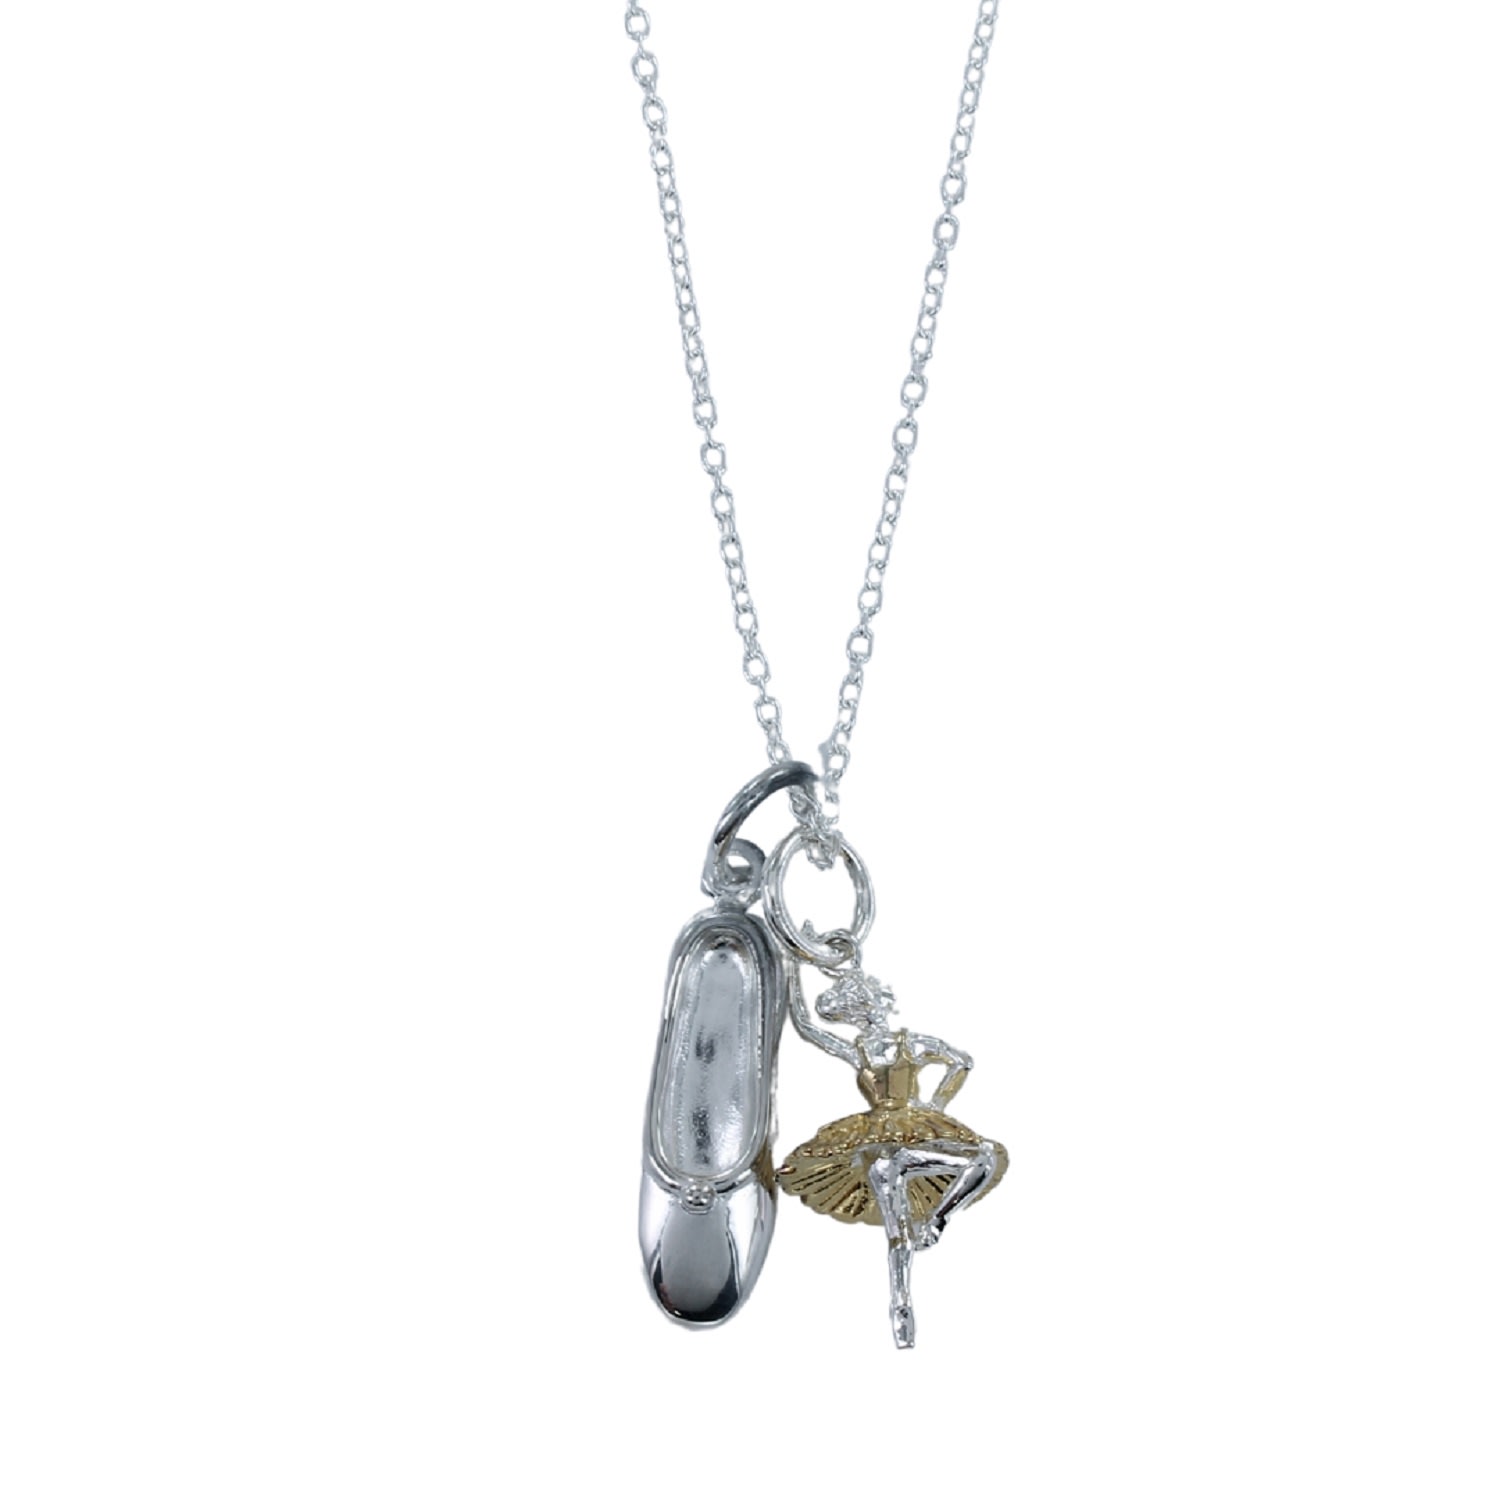 Women’s Silver / Gold Sterling Silver And Gold Plate Ballet Charm Necklace Reeves & Reeves